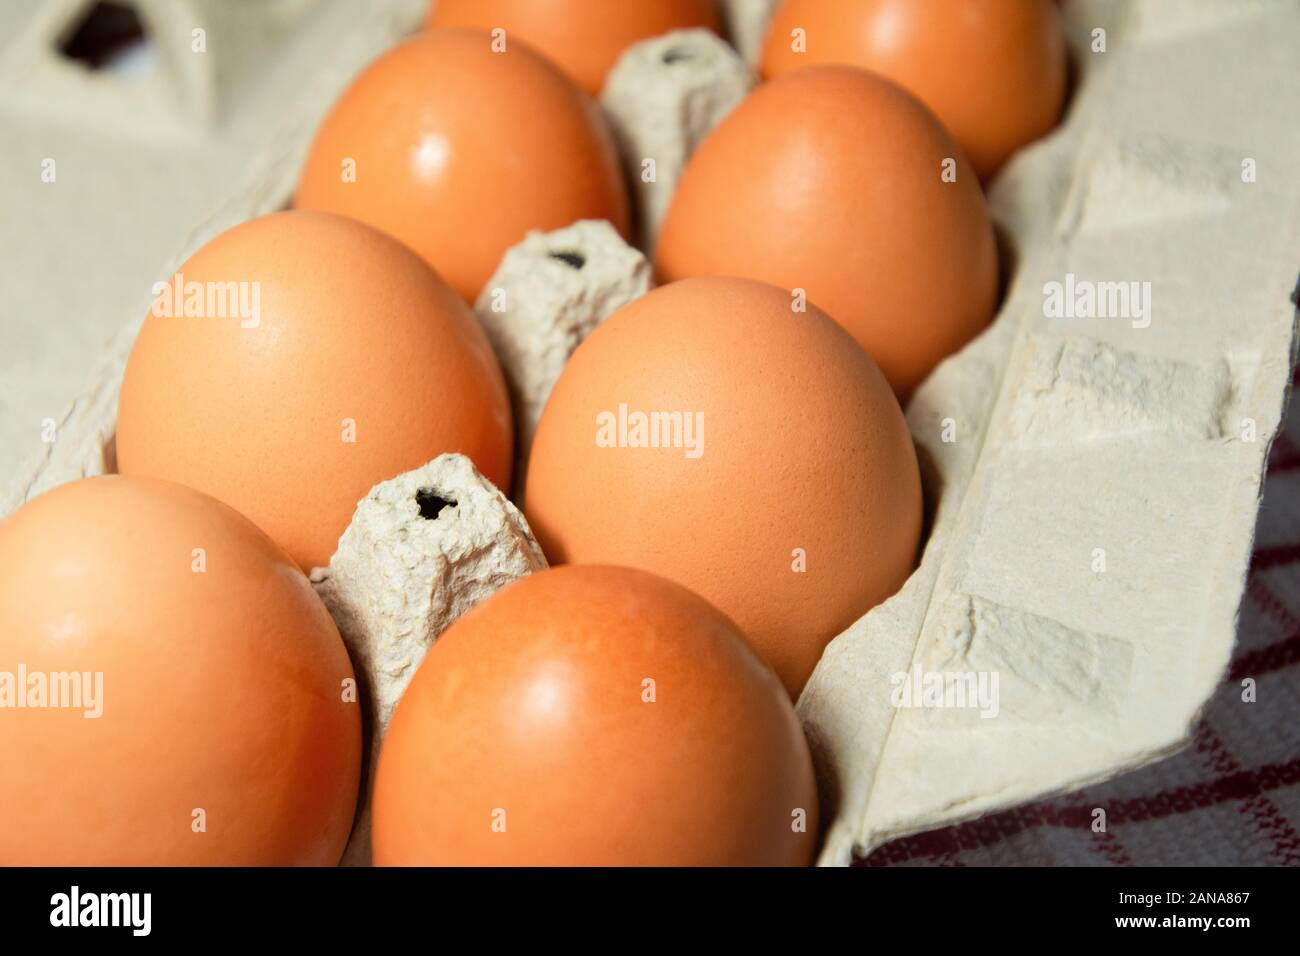 Close up of brown eggs in an egg carton. Stock Photo